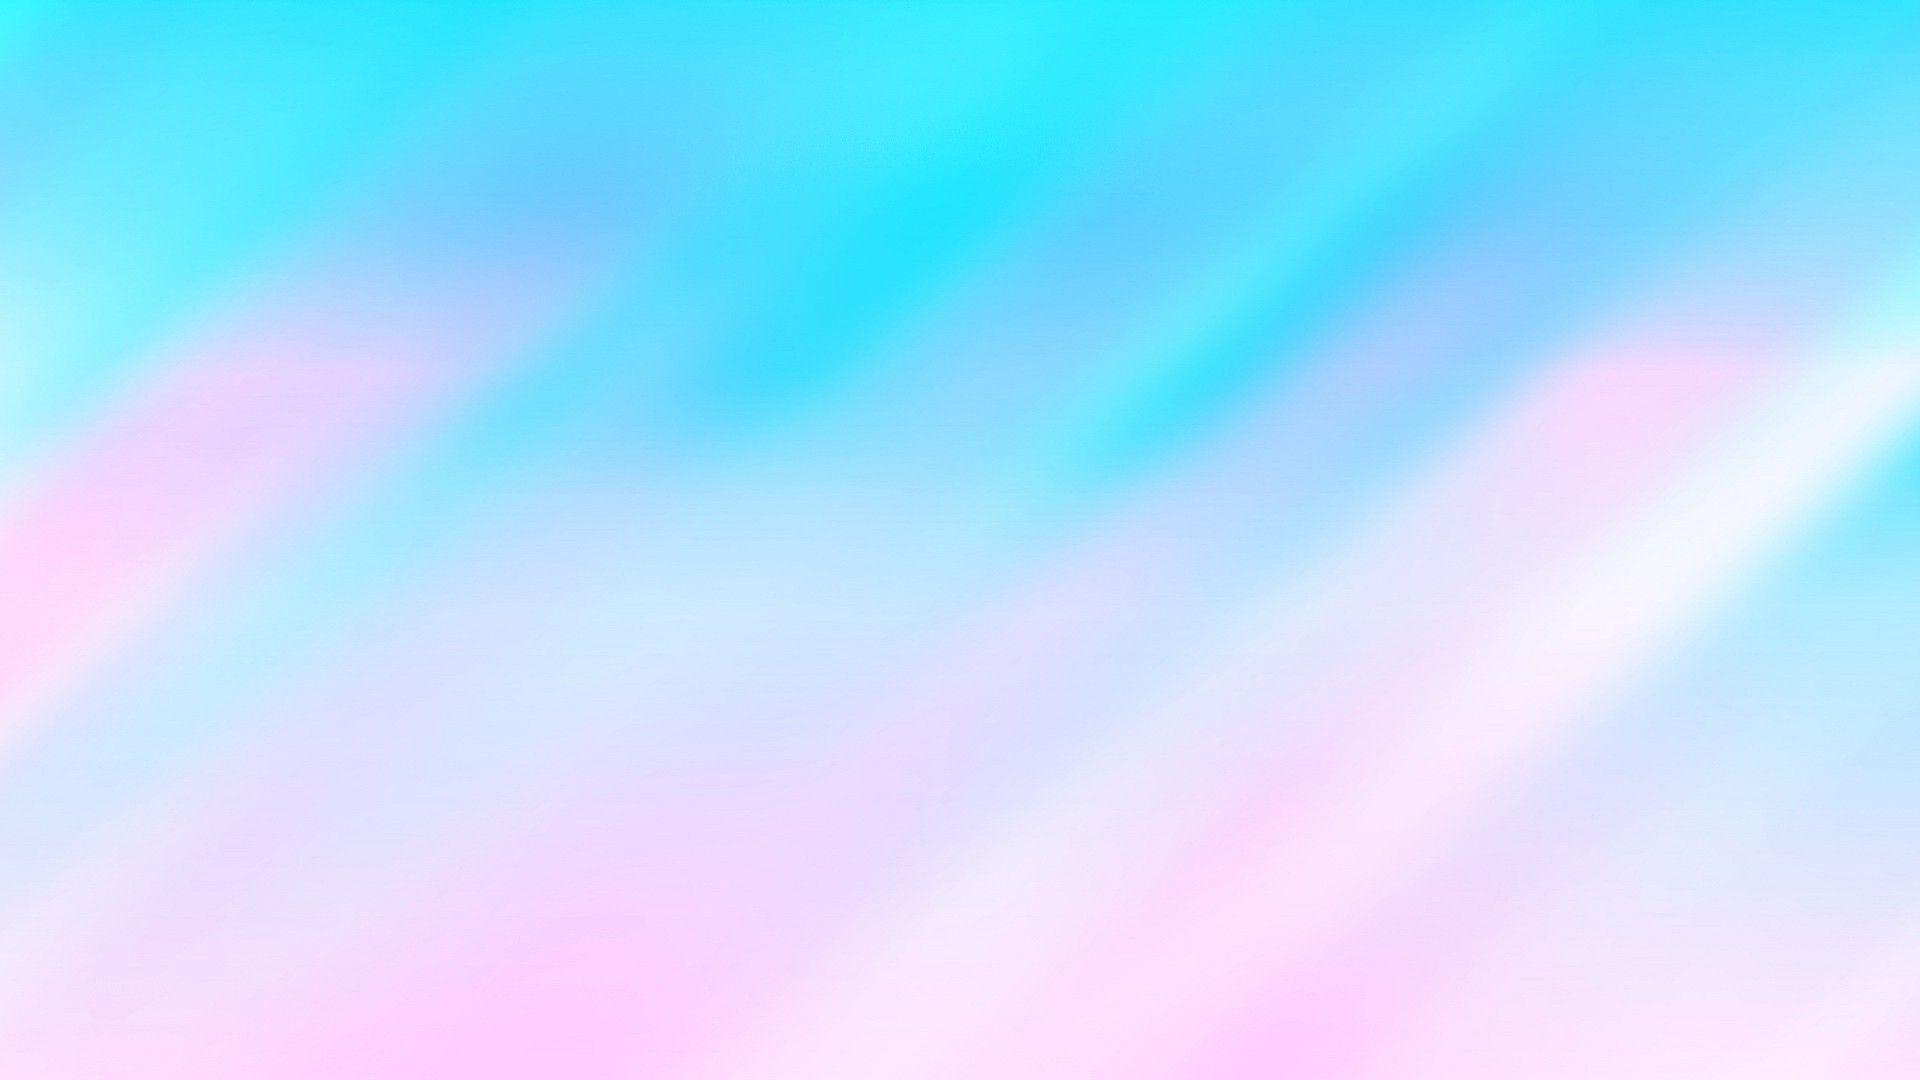 1920 X 1080 Pastel Wallpapers - Top Free 1920 X 1080 Pastel Backgrounds